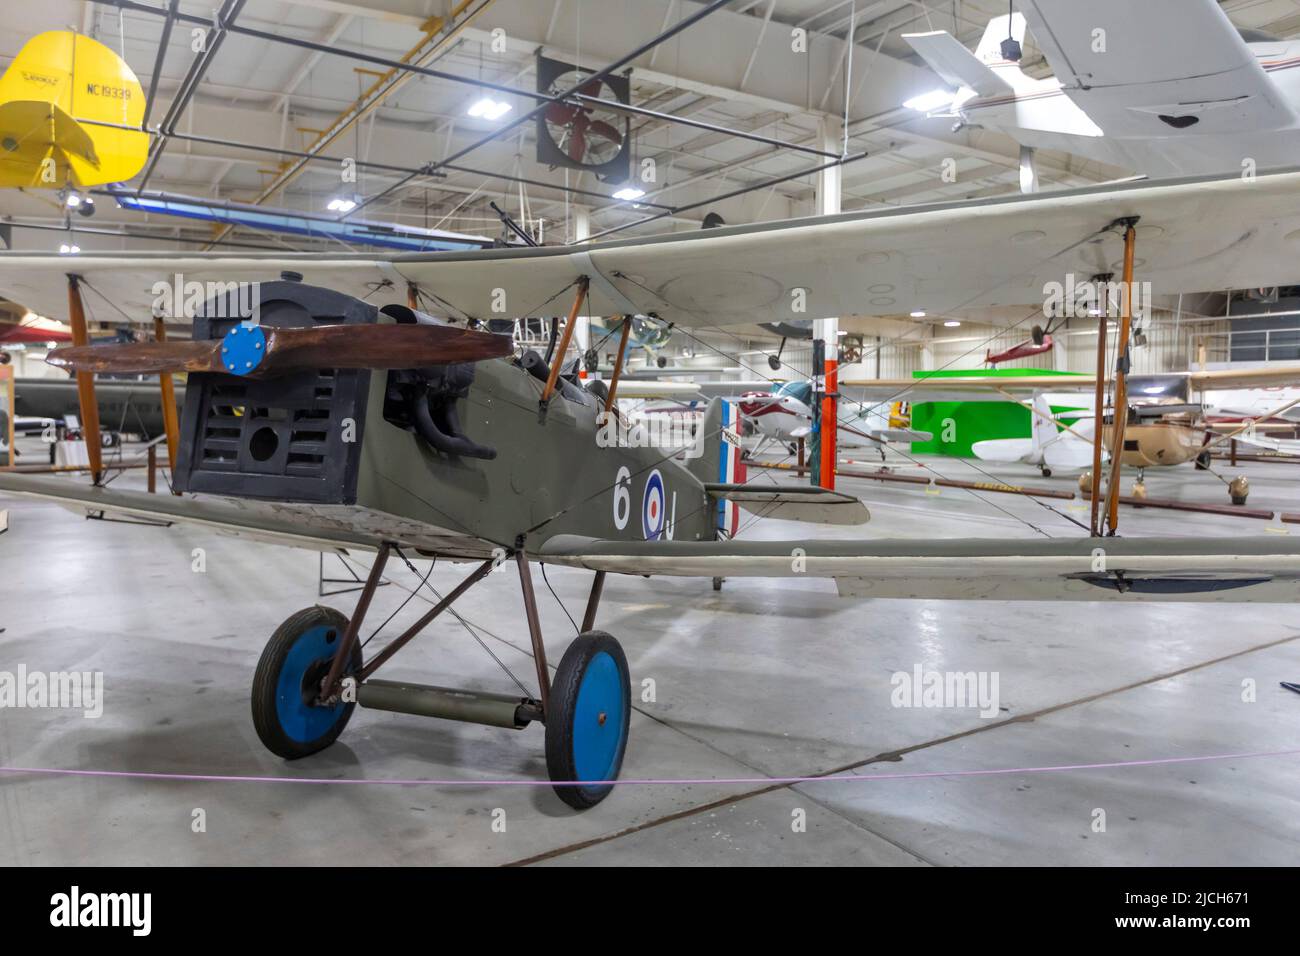 Liberal, Kansas - The Mid-America Air Museum. The museum displays over 100 aircraft. The Royal SE-5 was a British scout fighter during World War I. Stock Photo